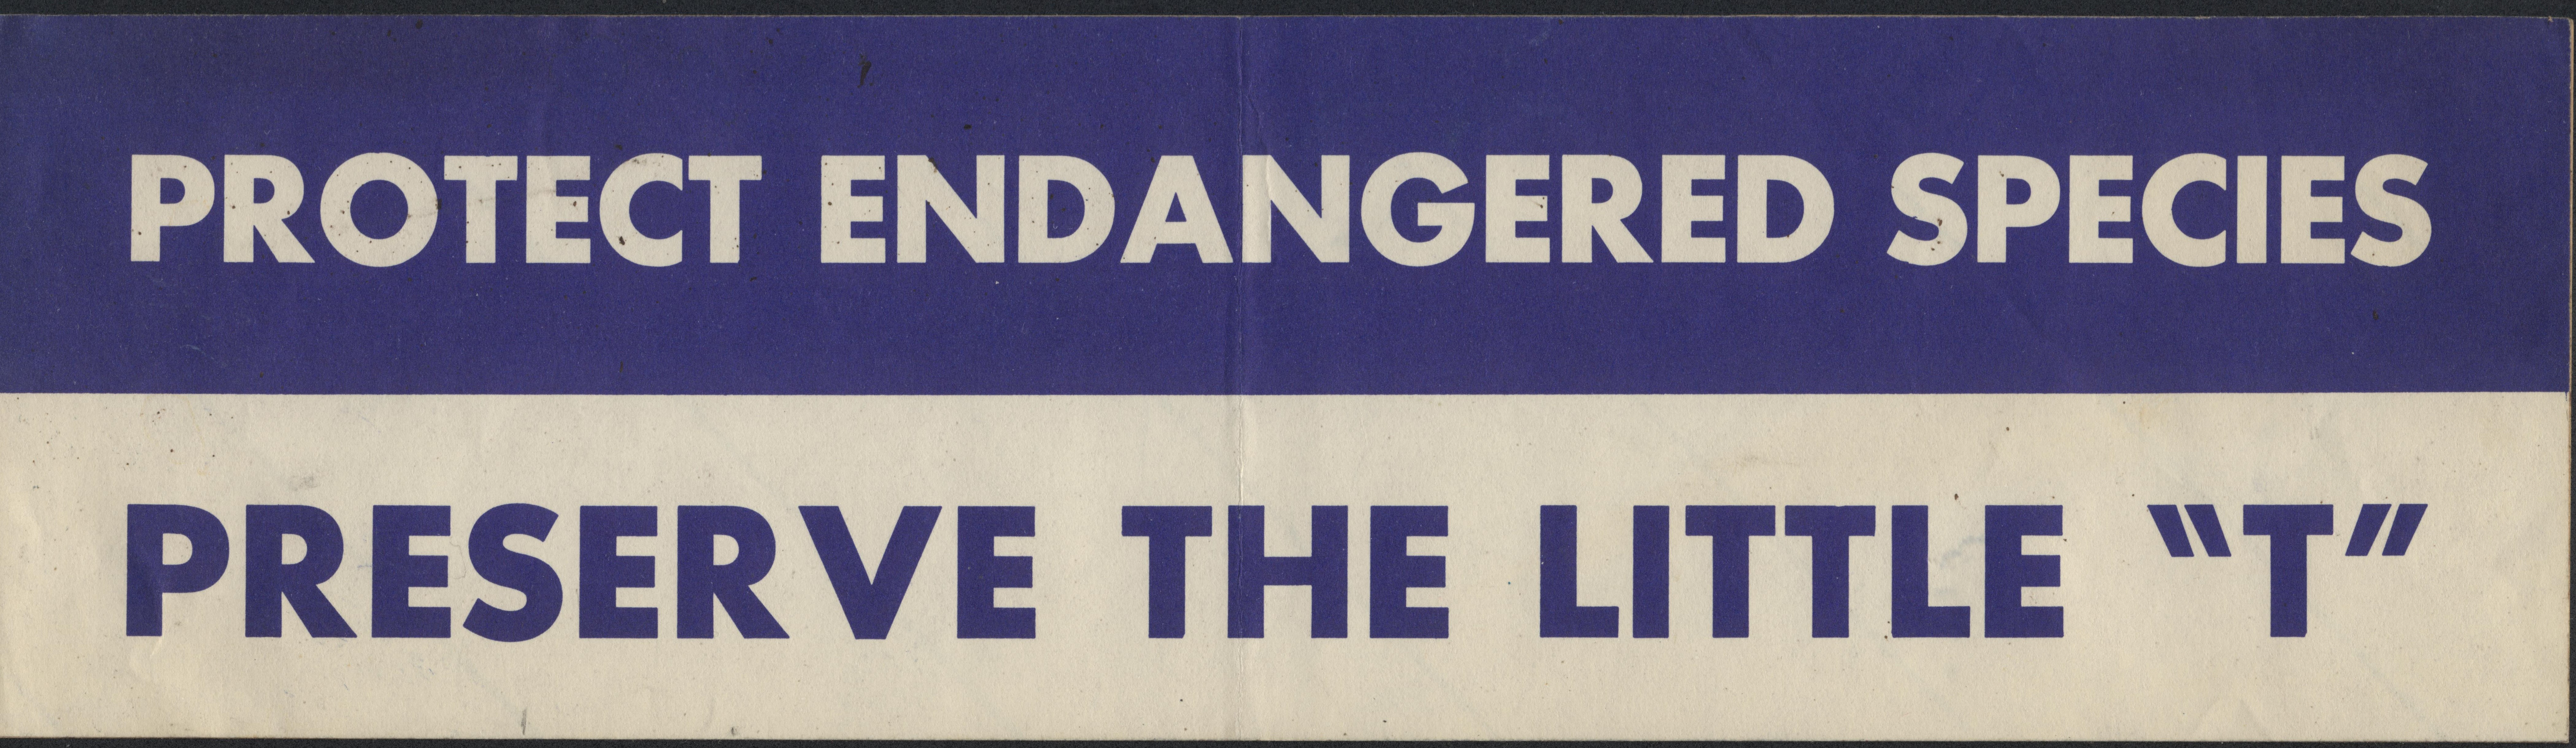 Bumper sticker divided in half lengthwise; top half is blue with white letters "PROTECT ENDANGERED SPECIES" bottom half is white with blue letters "PRESERVE THE LITTLE 'T'"